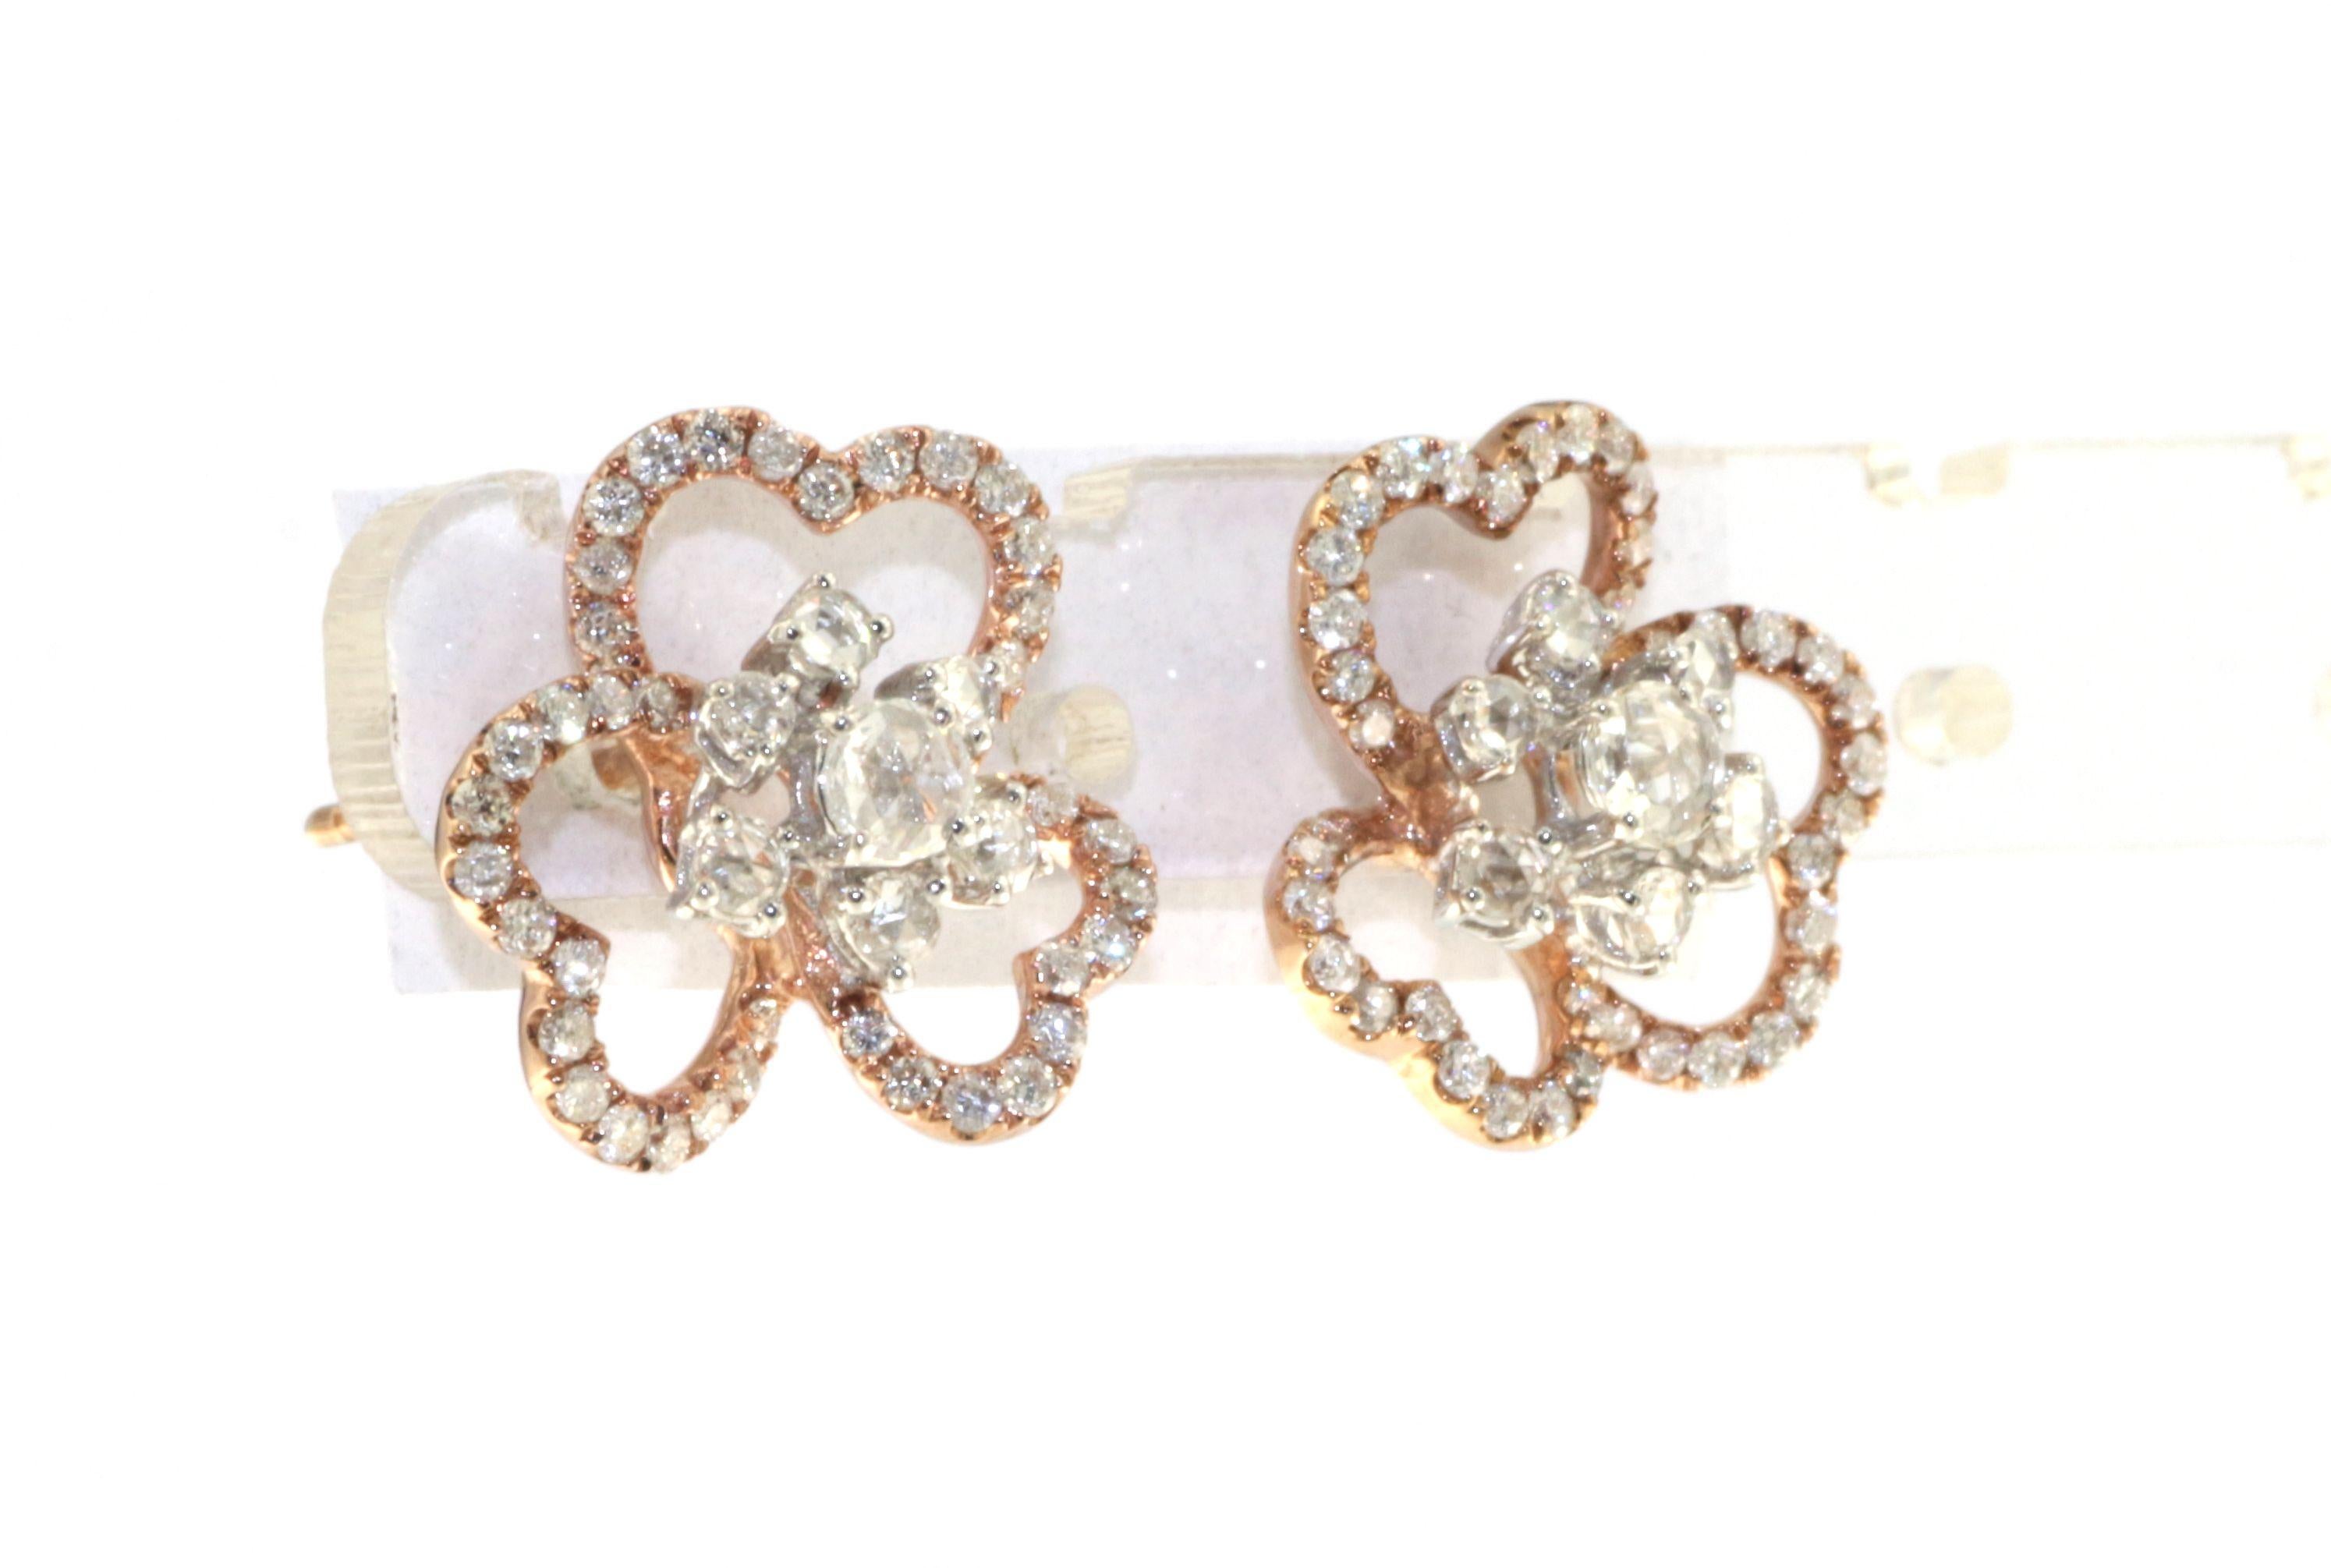 The earrings presented are an exquisite blend of classic charm and modern design. Crafted from 18K white and rose gold, they offer a dual-tone appeal that is both distinctive and timeless. The design features a floral motif, a universal symbol of